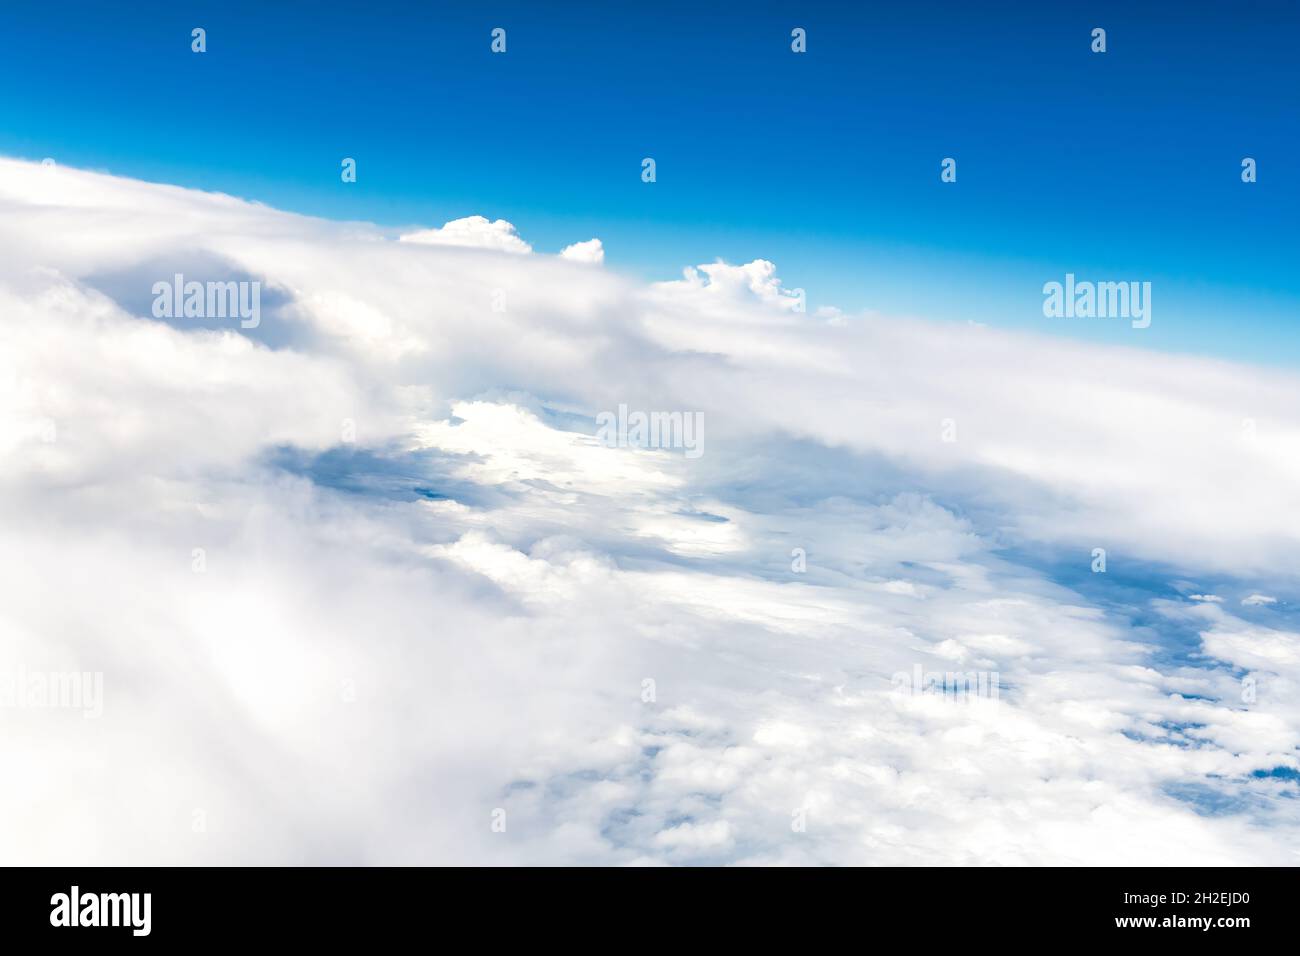 Simplicity and beauty of clouds in a blue sky. Stock Photo